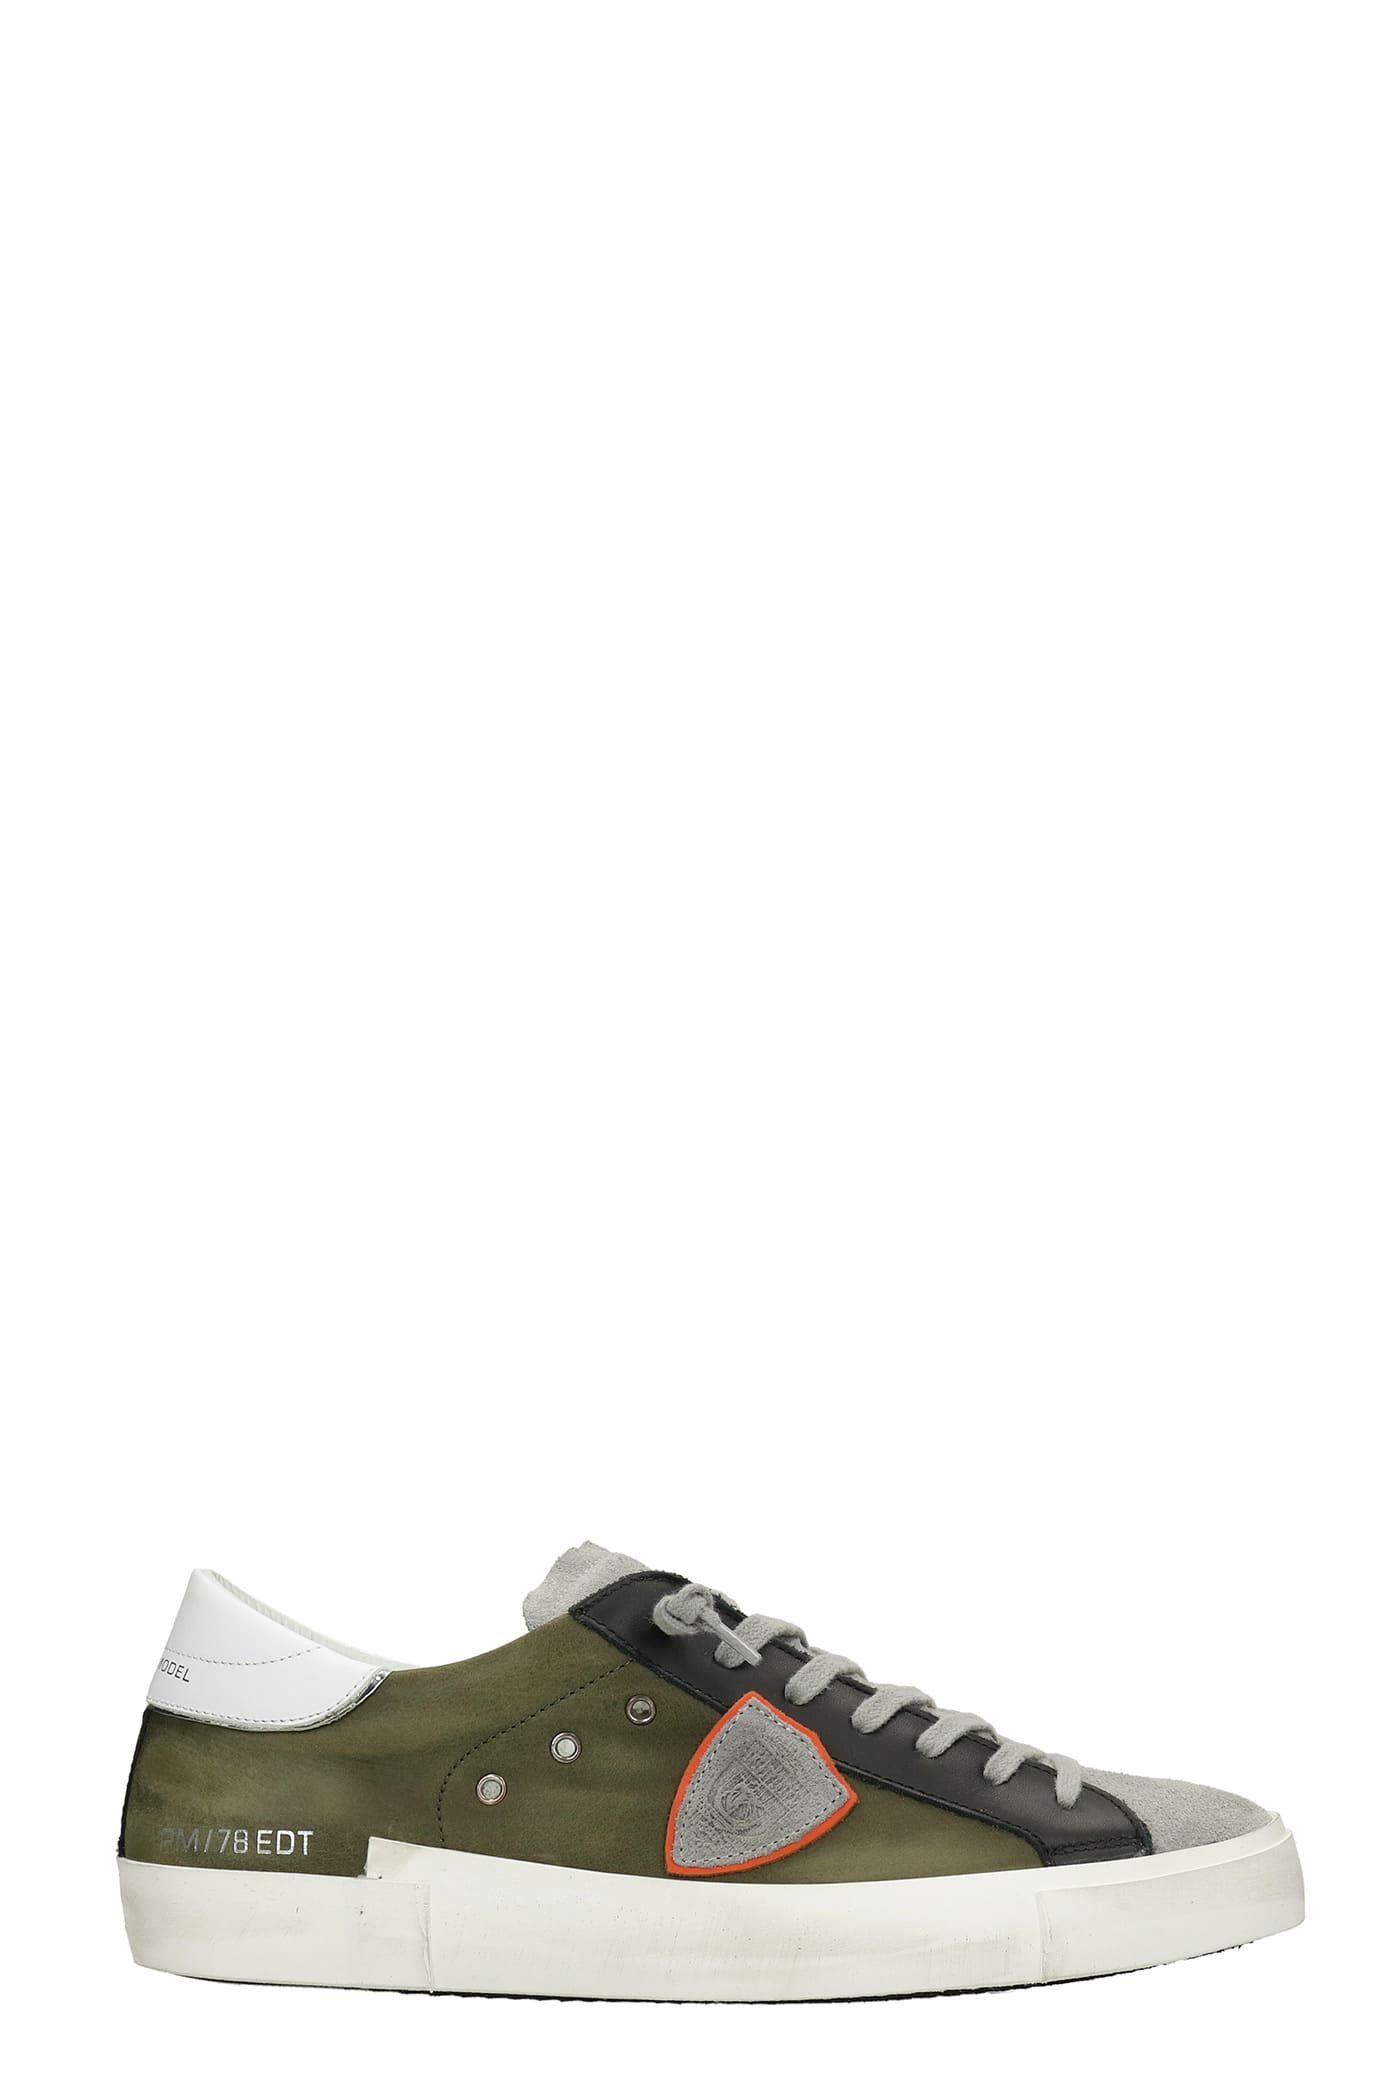 Philippe Model Prsx Sneakers In Green Suede And Fabric